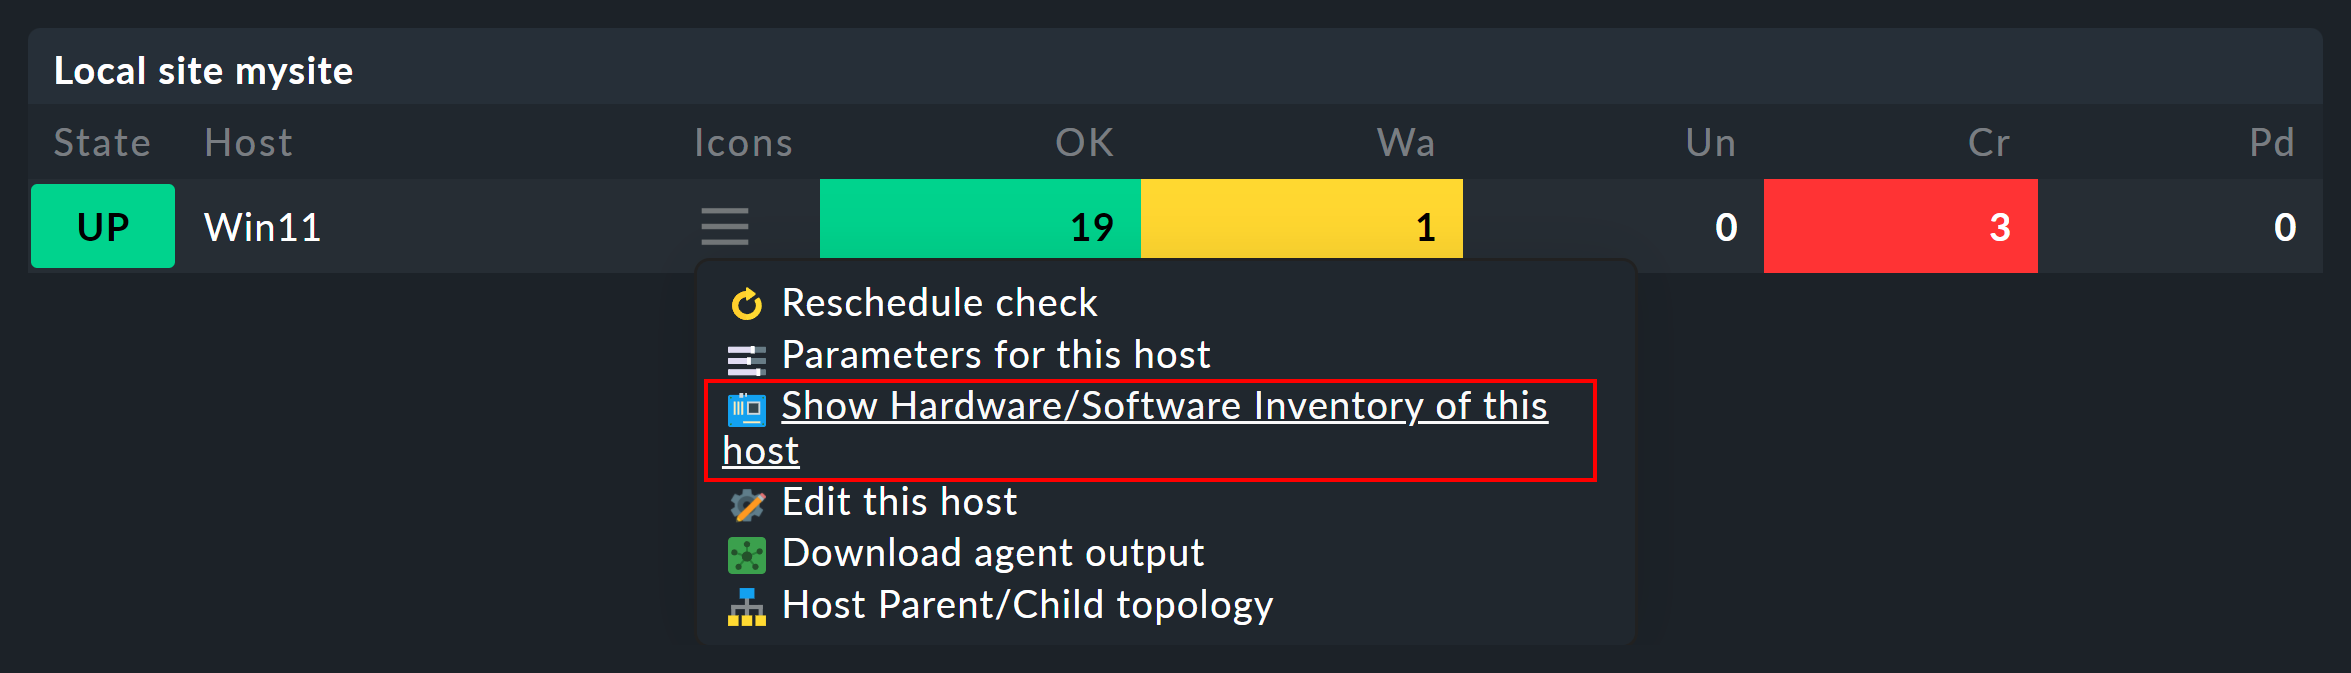 Context menu for viewing the inventory of a host.